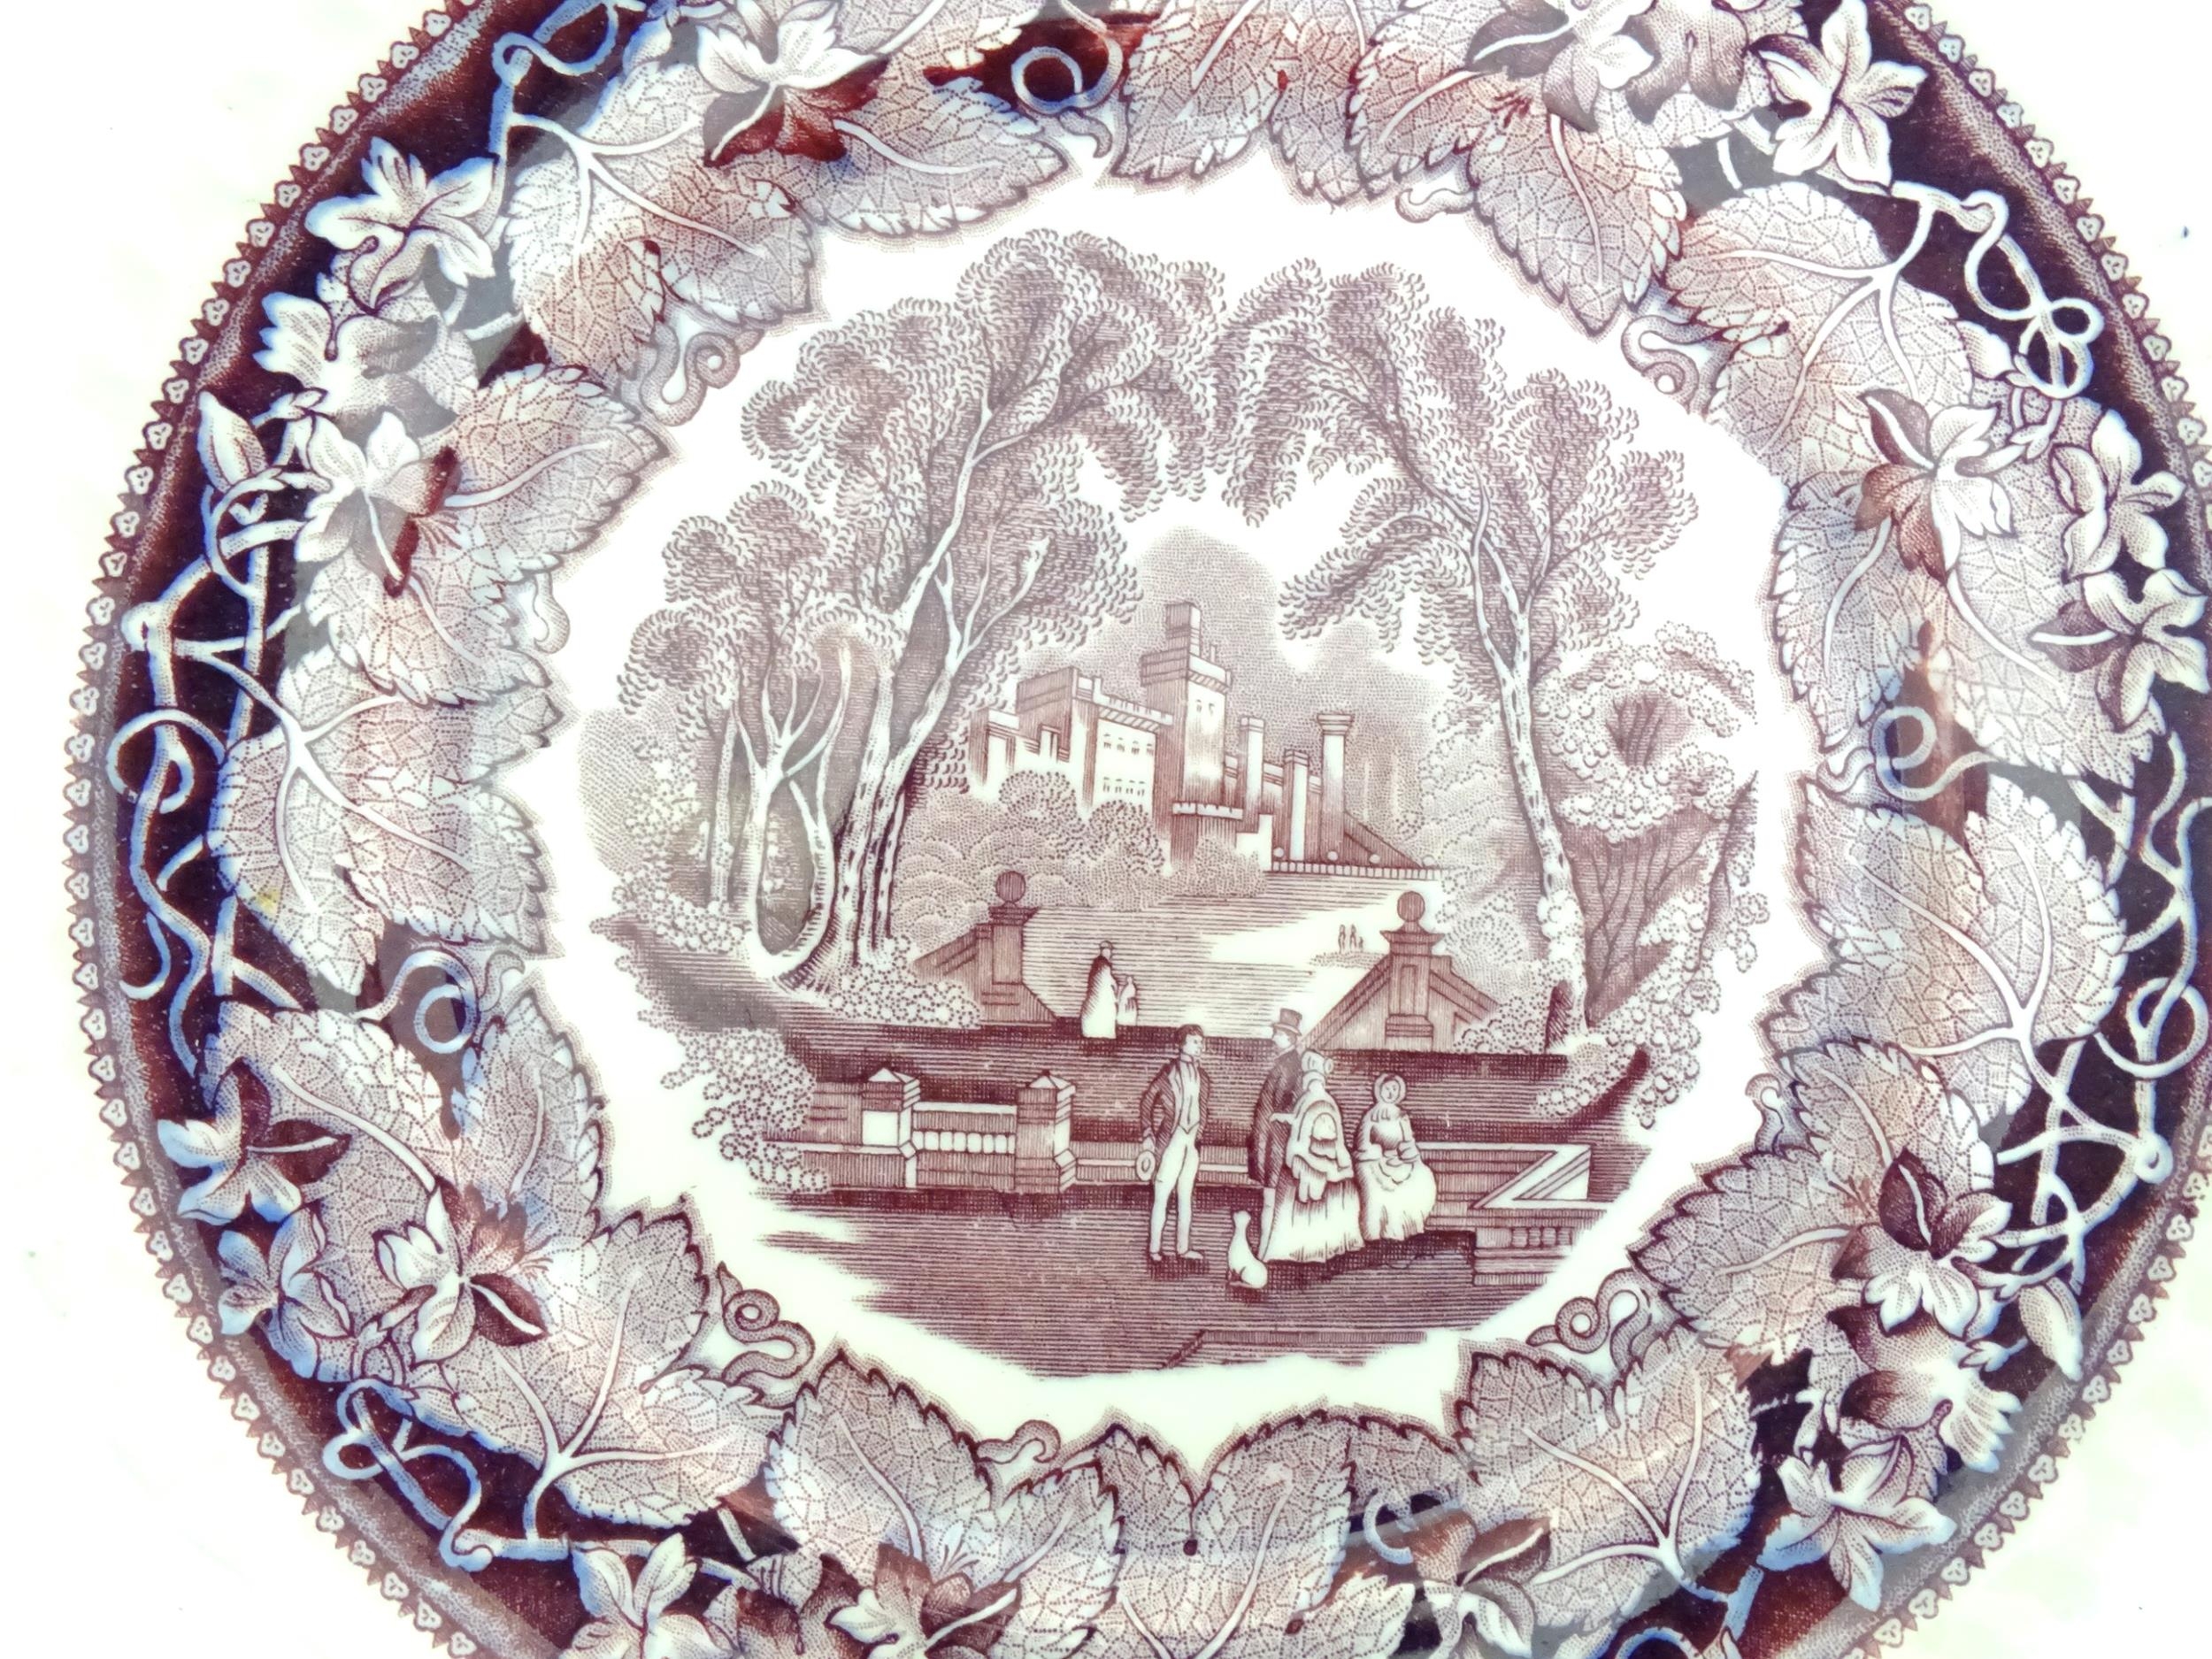 Quantity Masons ironstone plates Please Note - we do not make reference to the condition - Image 5 of 10